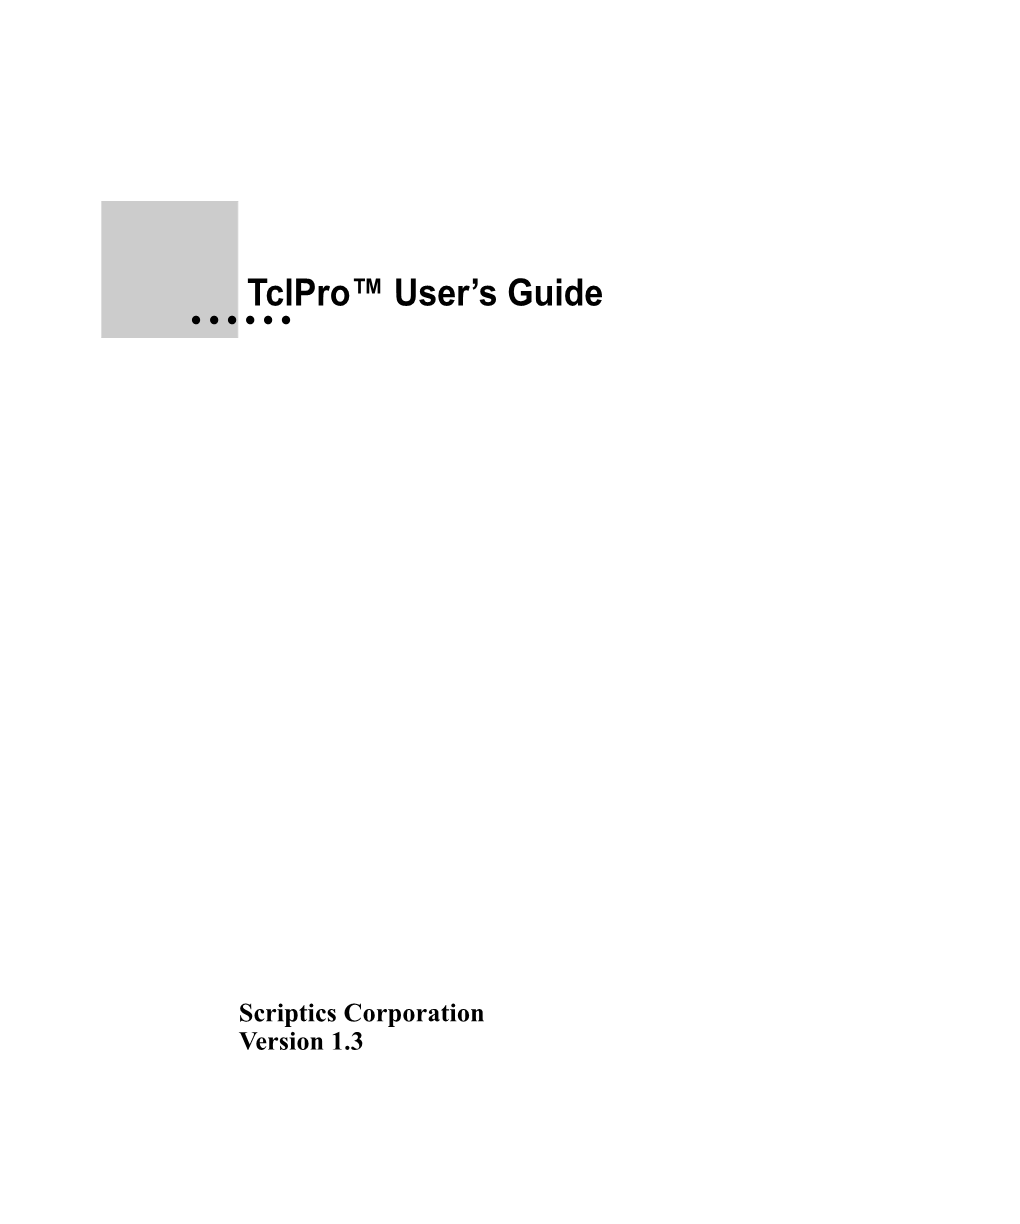 Tclpro™ User's Guide